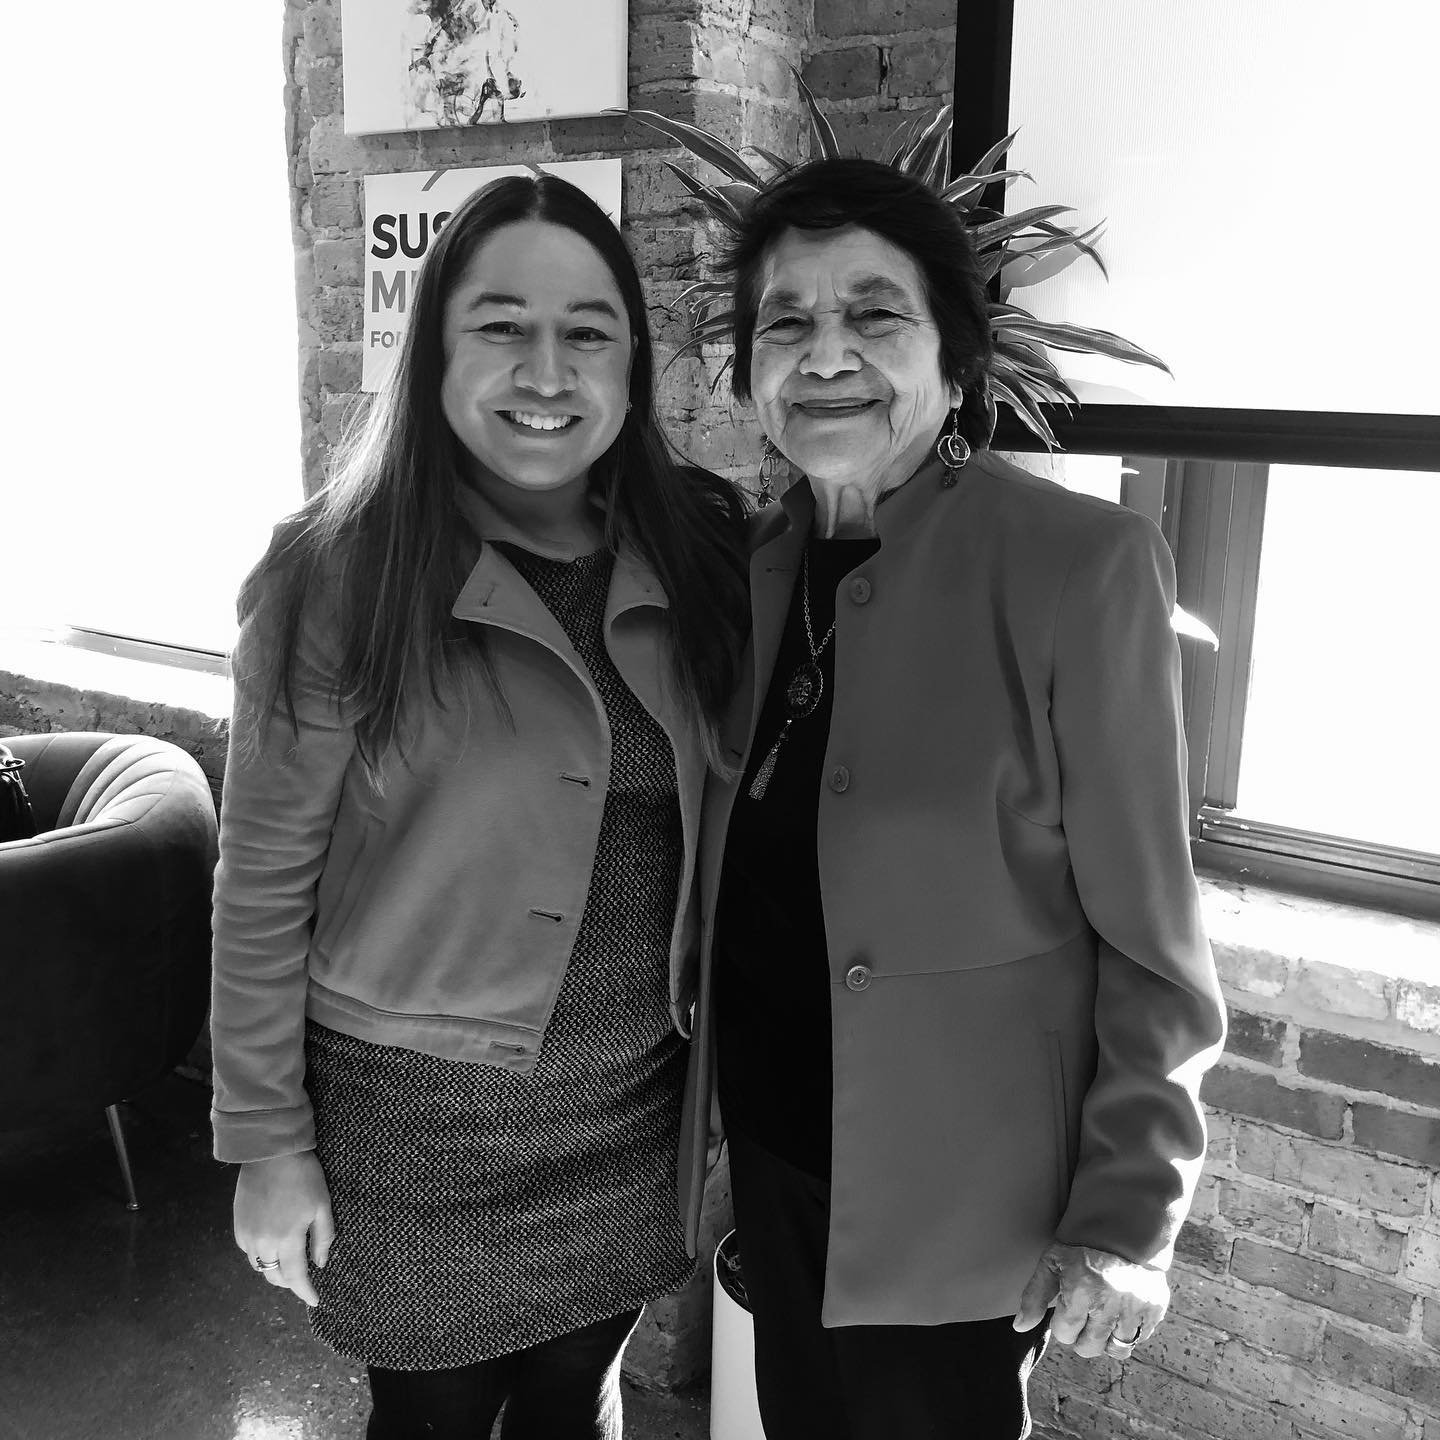 &ldquo;Every minute is a chance to change the world.&rdquo; - Dolores Huerta

Feliz Birthday to the one and only civil rights icon, Dolores Huerta 👑

From championing the rights of farm workers to advocating for women, her dedication to civil rights